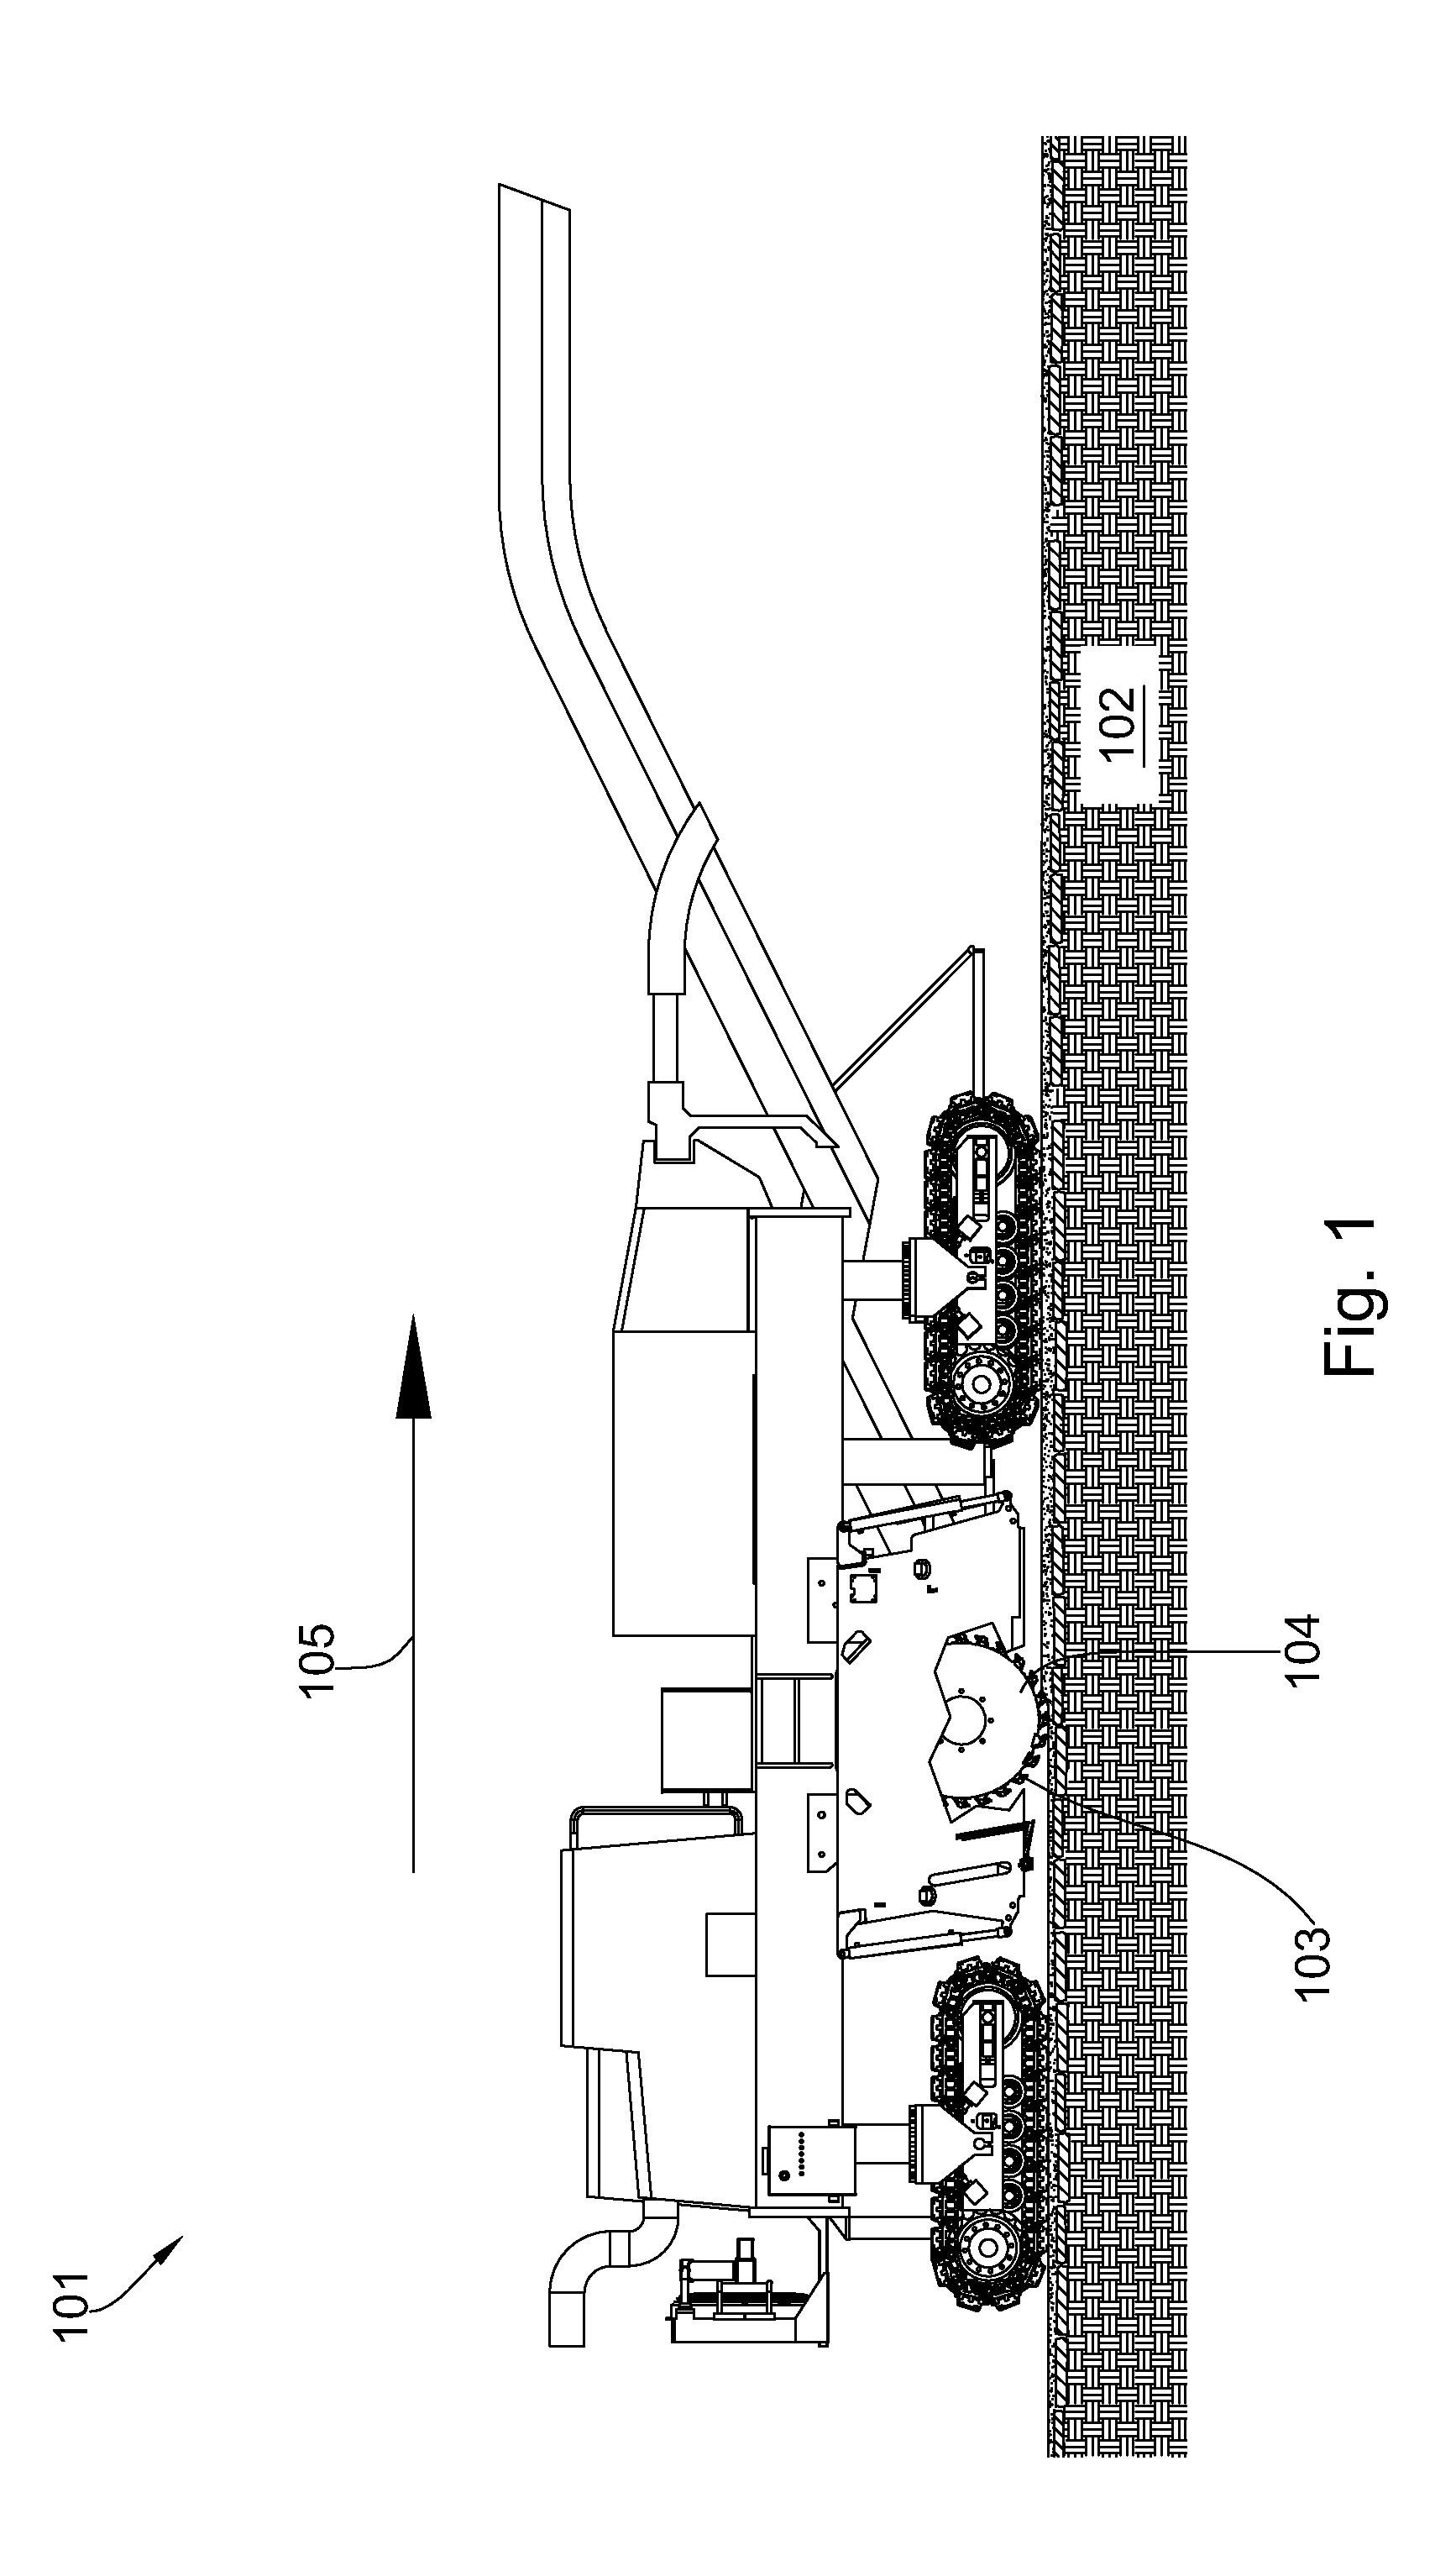 Pick assembly with integrated piston